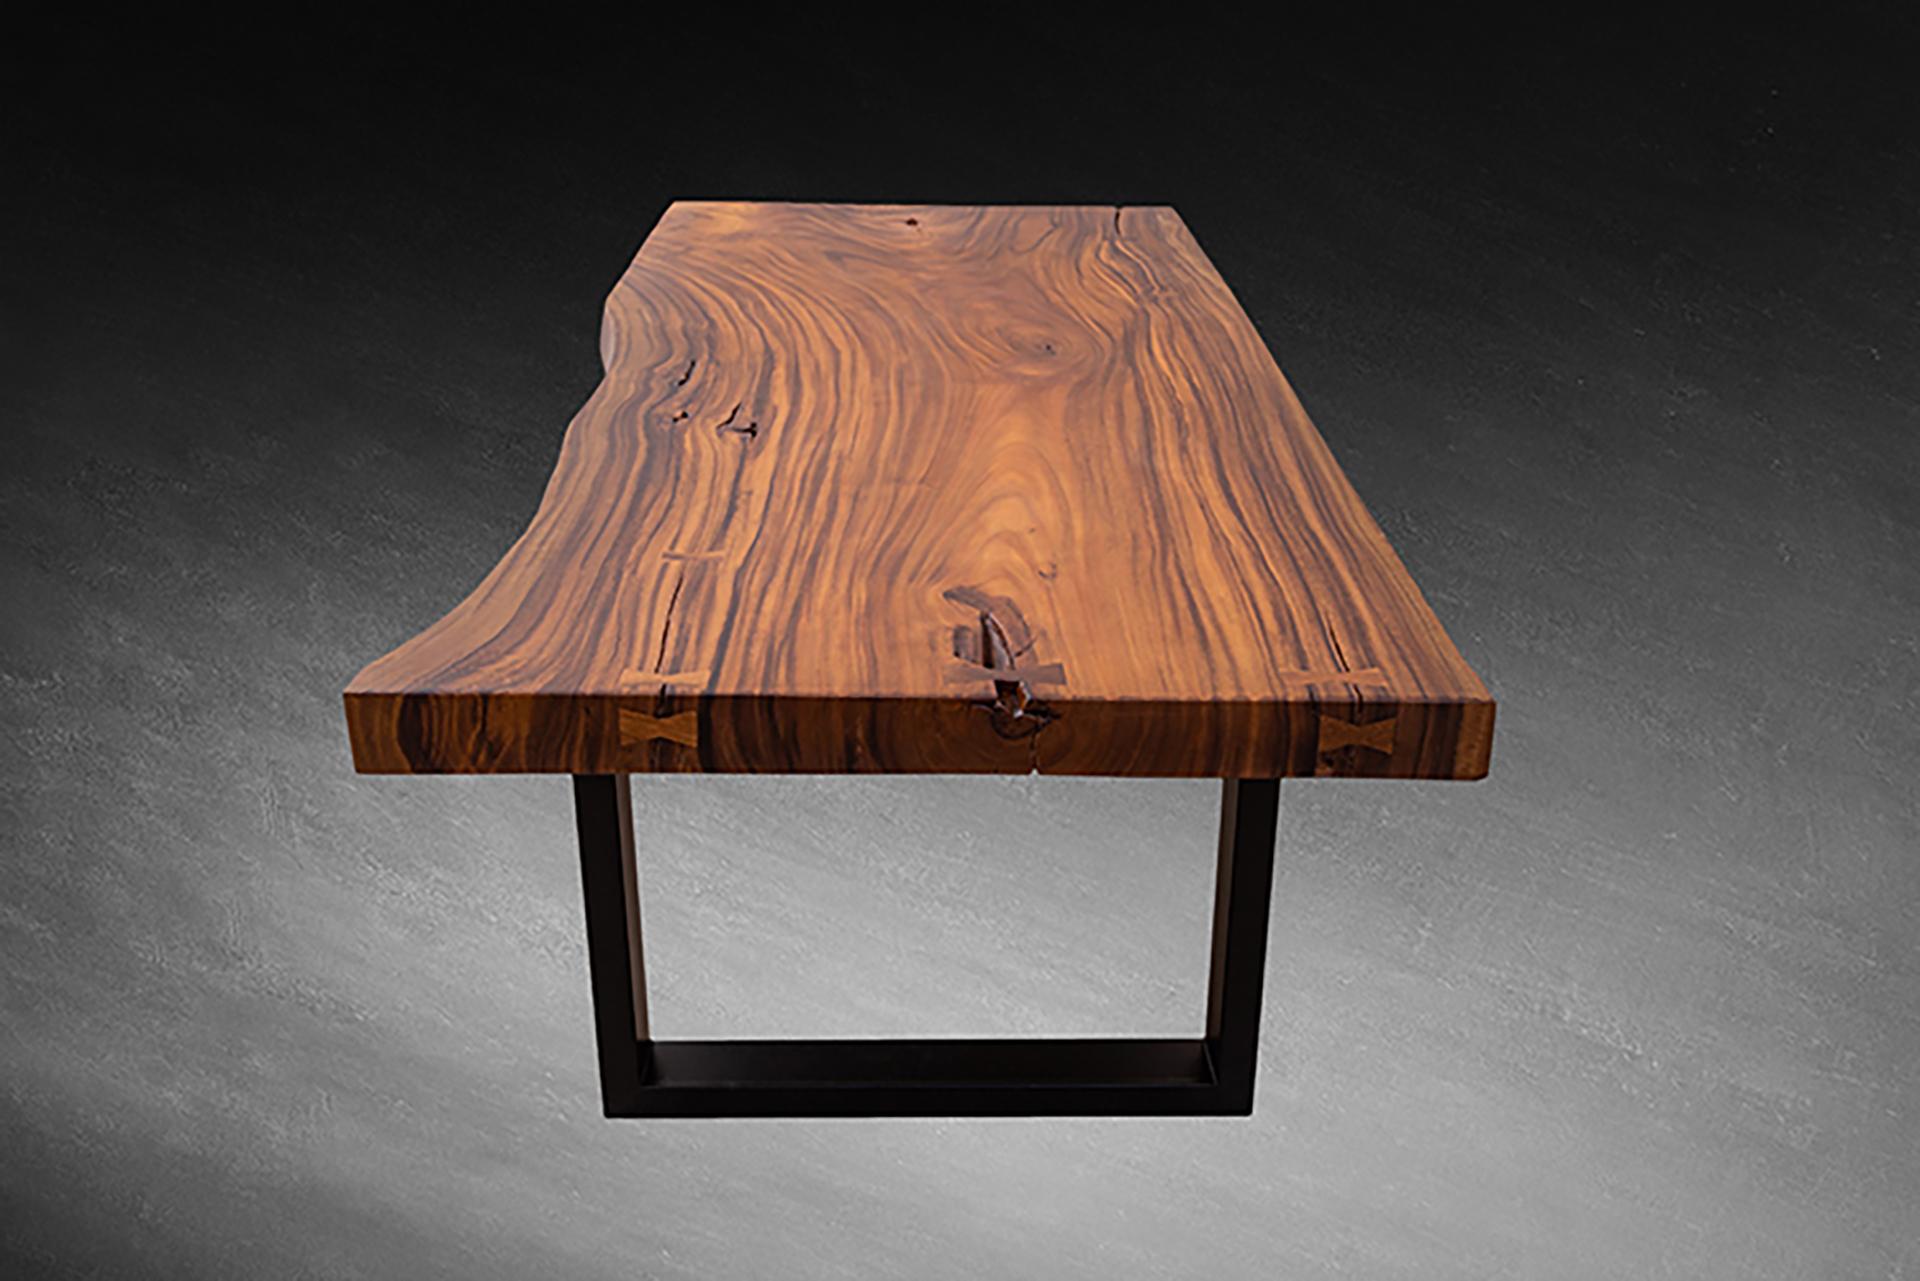 Thai Acacia Live Edge Limited Edition Slab Table in Smooth Milk Chocolate For Sale